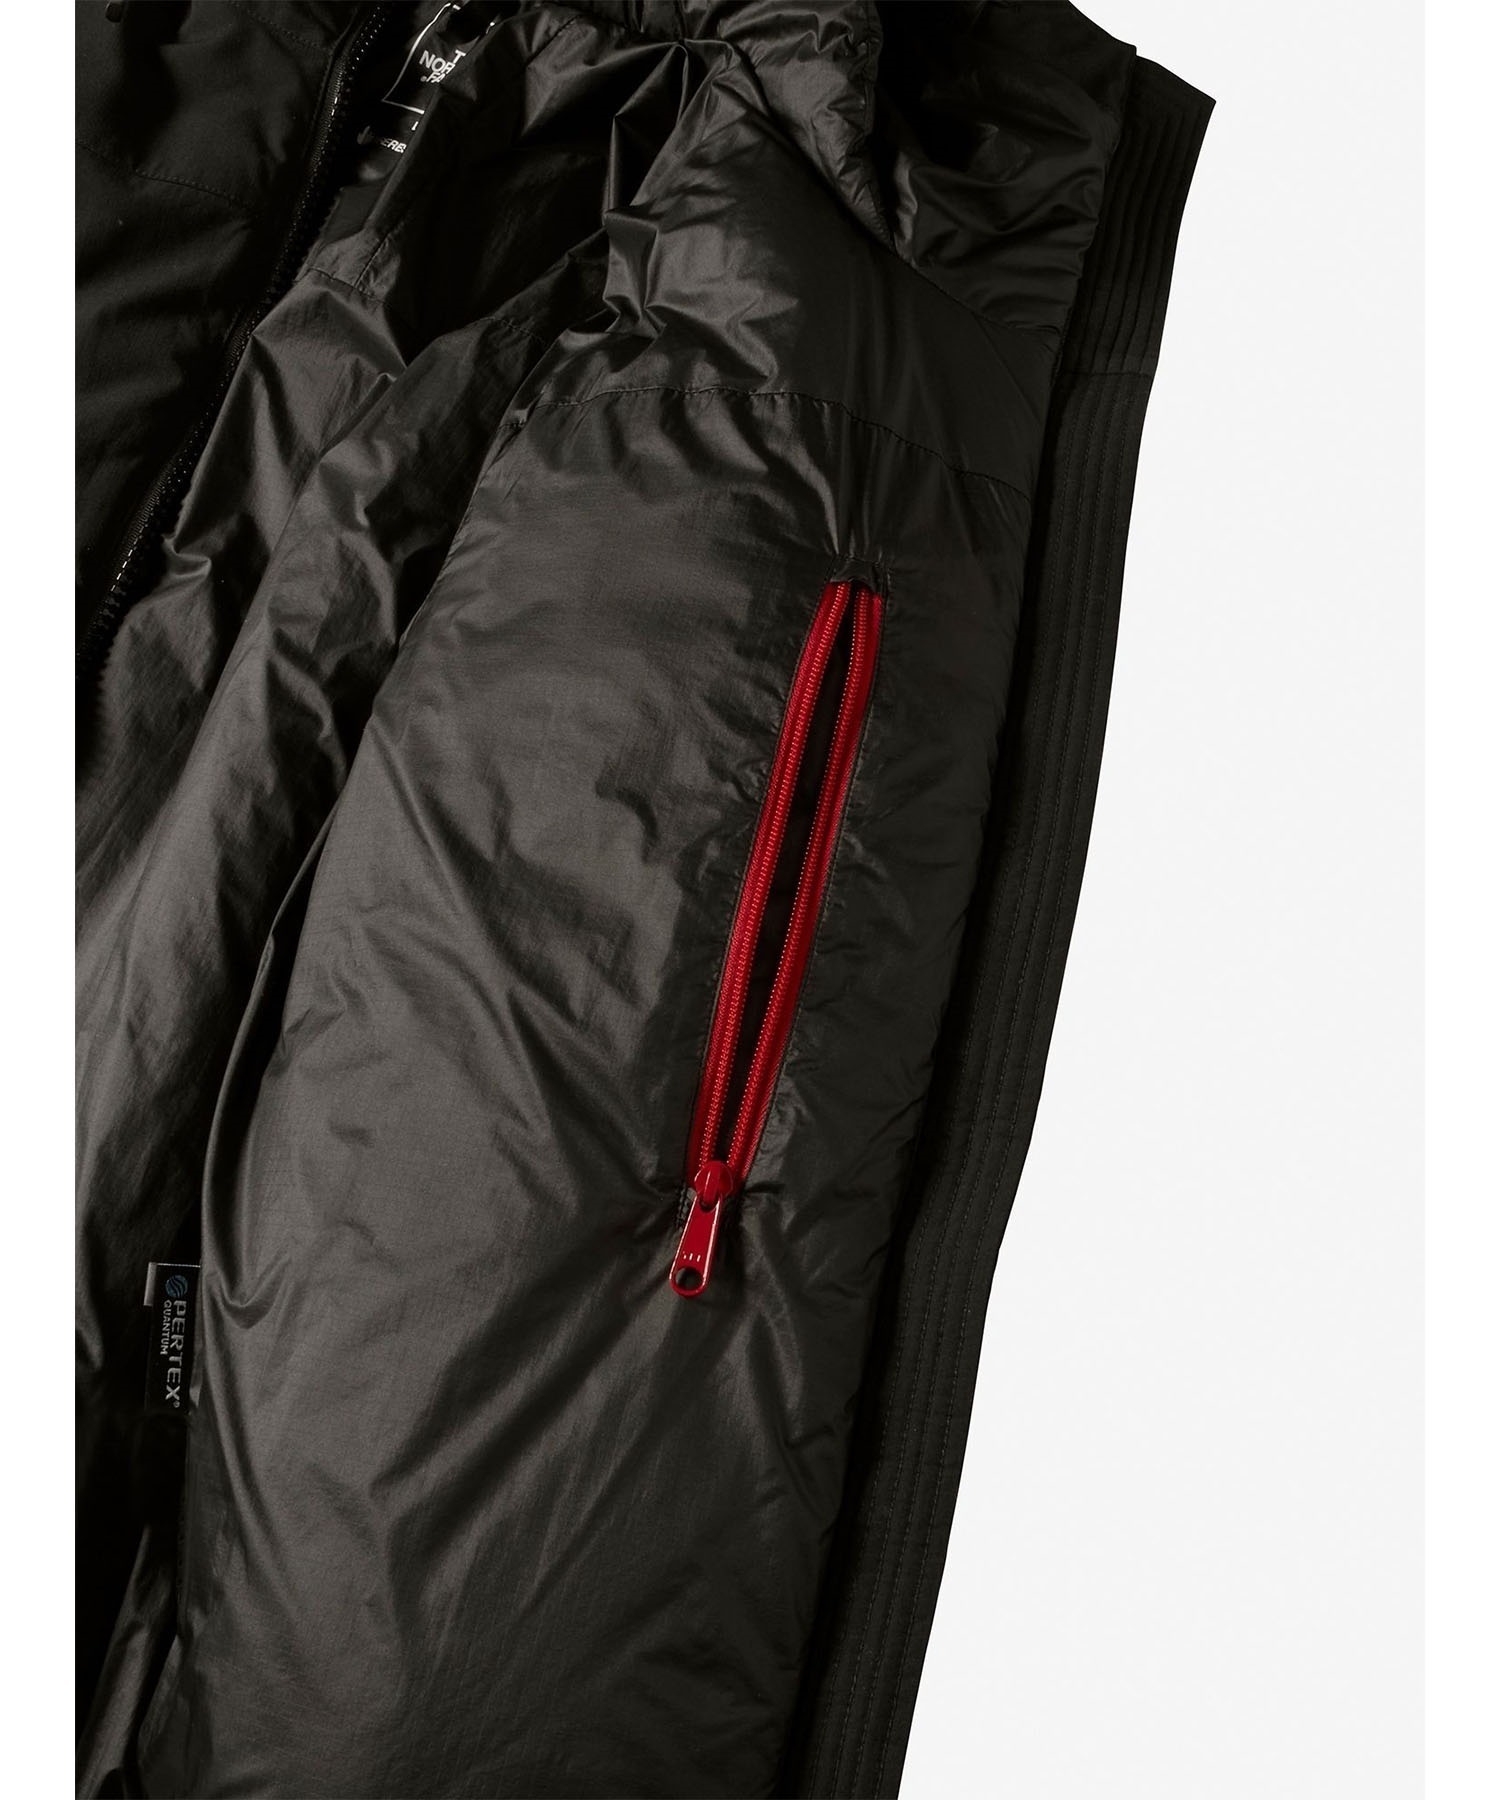 THE NORTH FACE/ノース・フェイス FIREFLY INSULATED PARKA メンズ